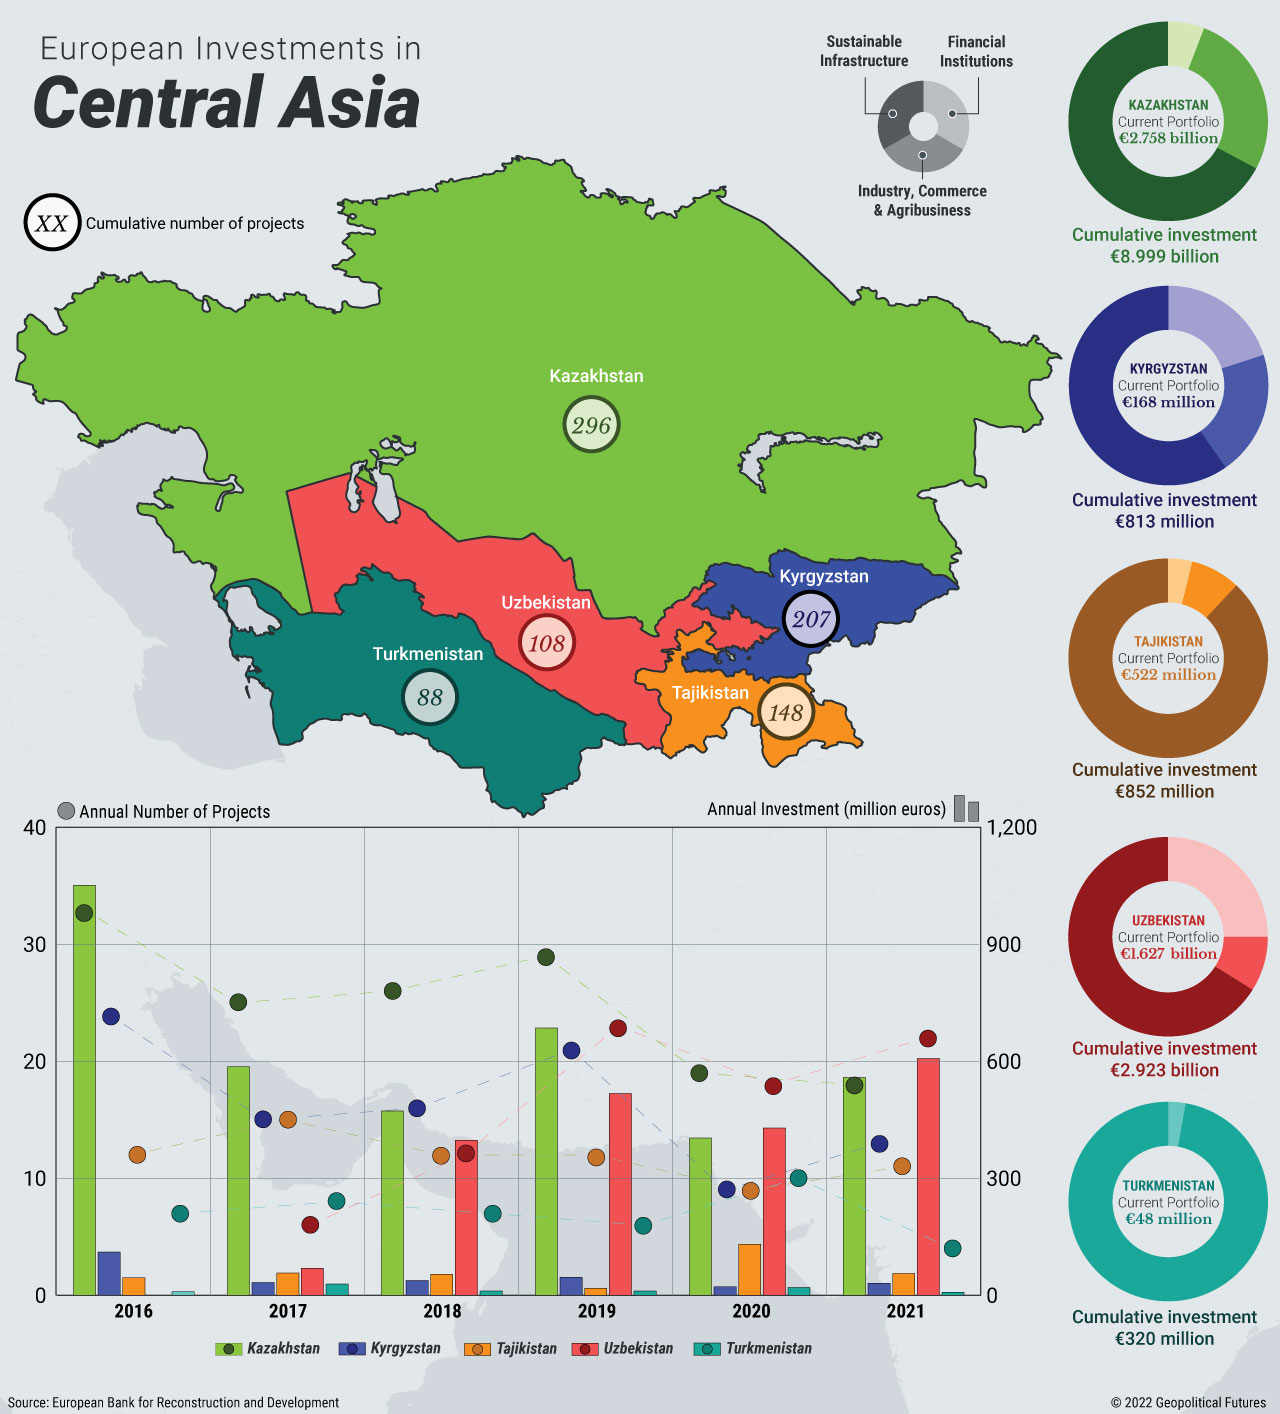 European Investments in Central Asia